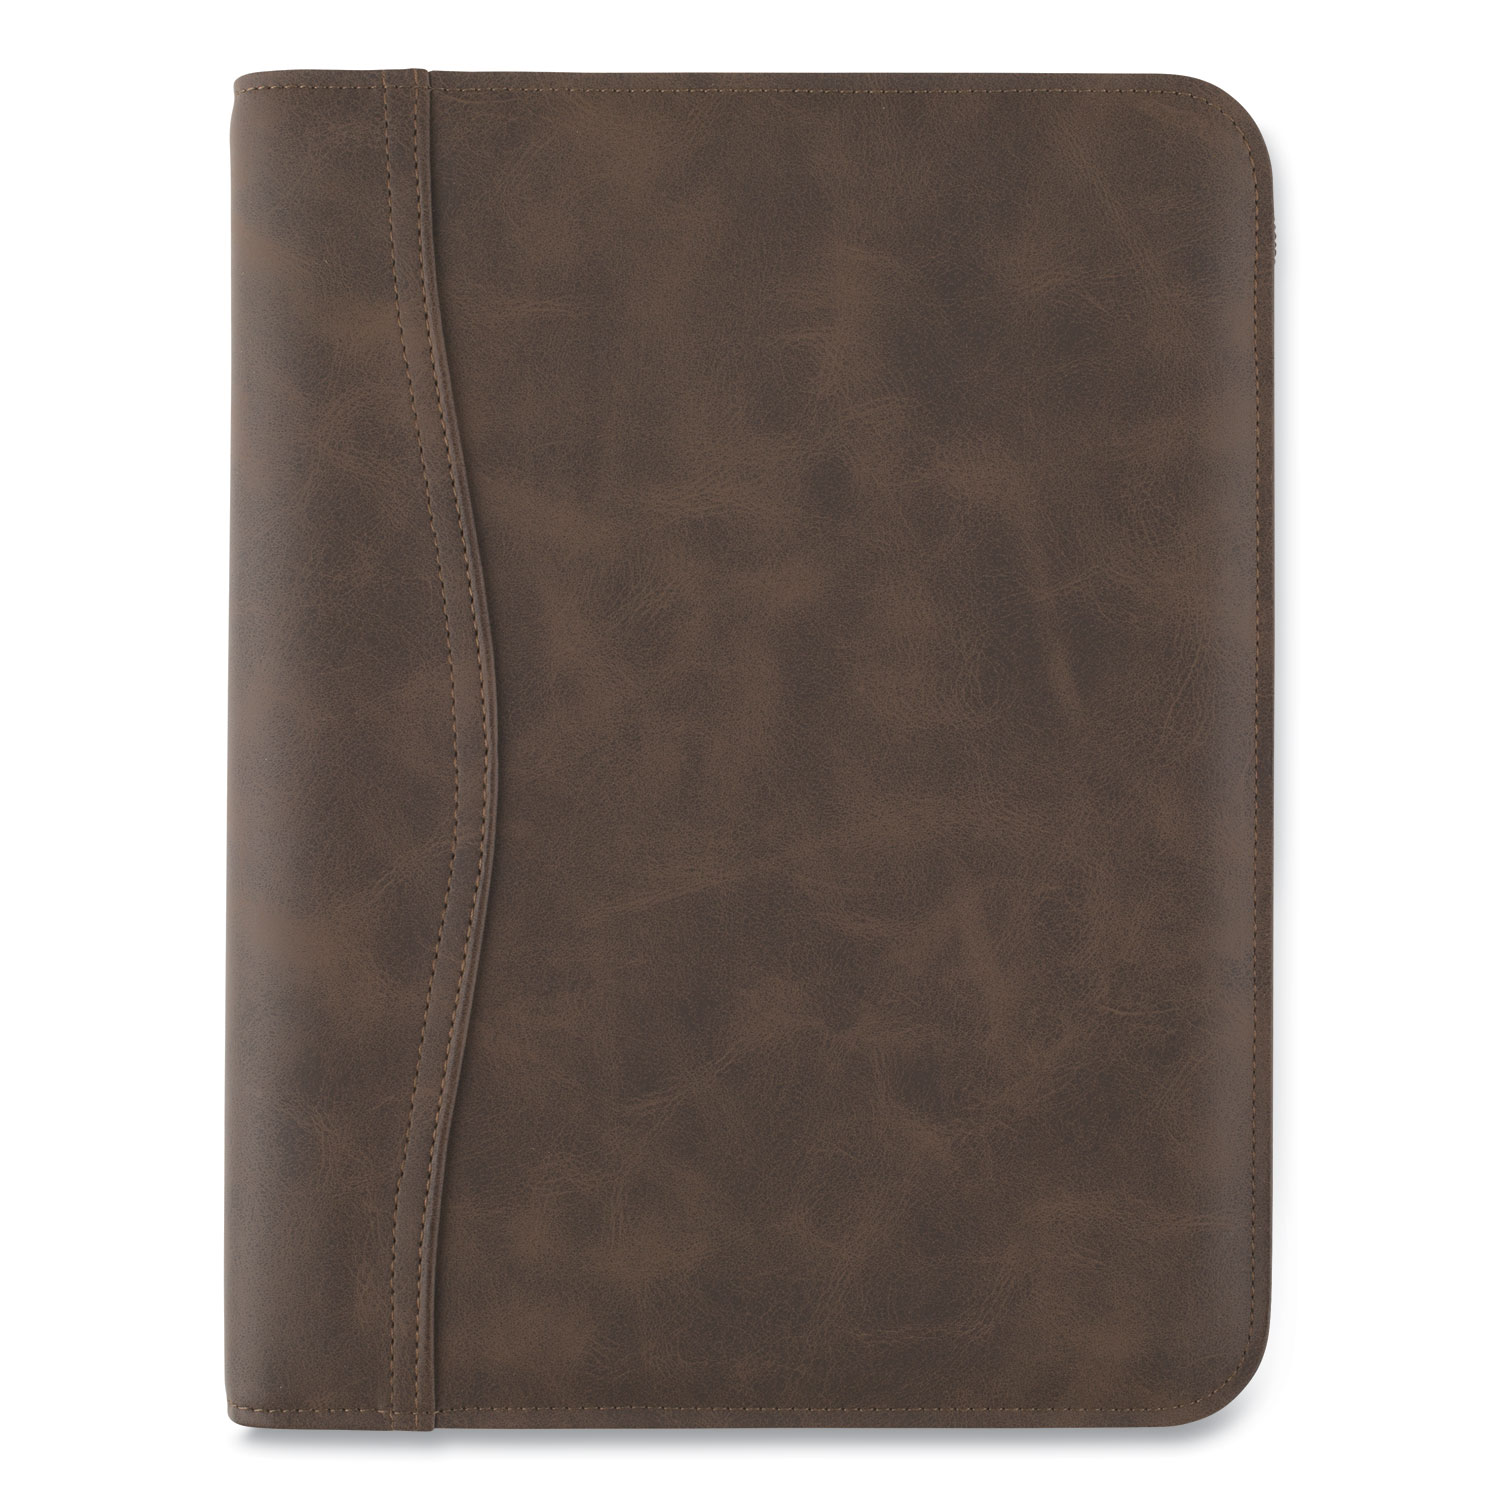  AT-A-GLANCE 031014004 Distressed Brown Leather Starter Set, 11 x 8.5, Brown (AAG031014004) 